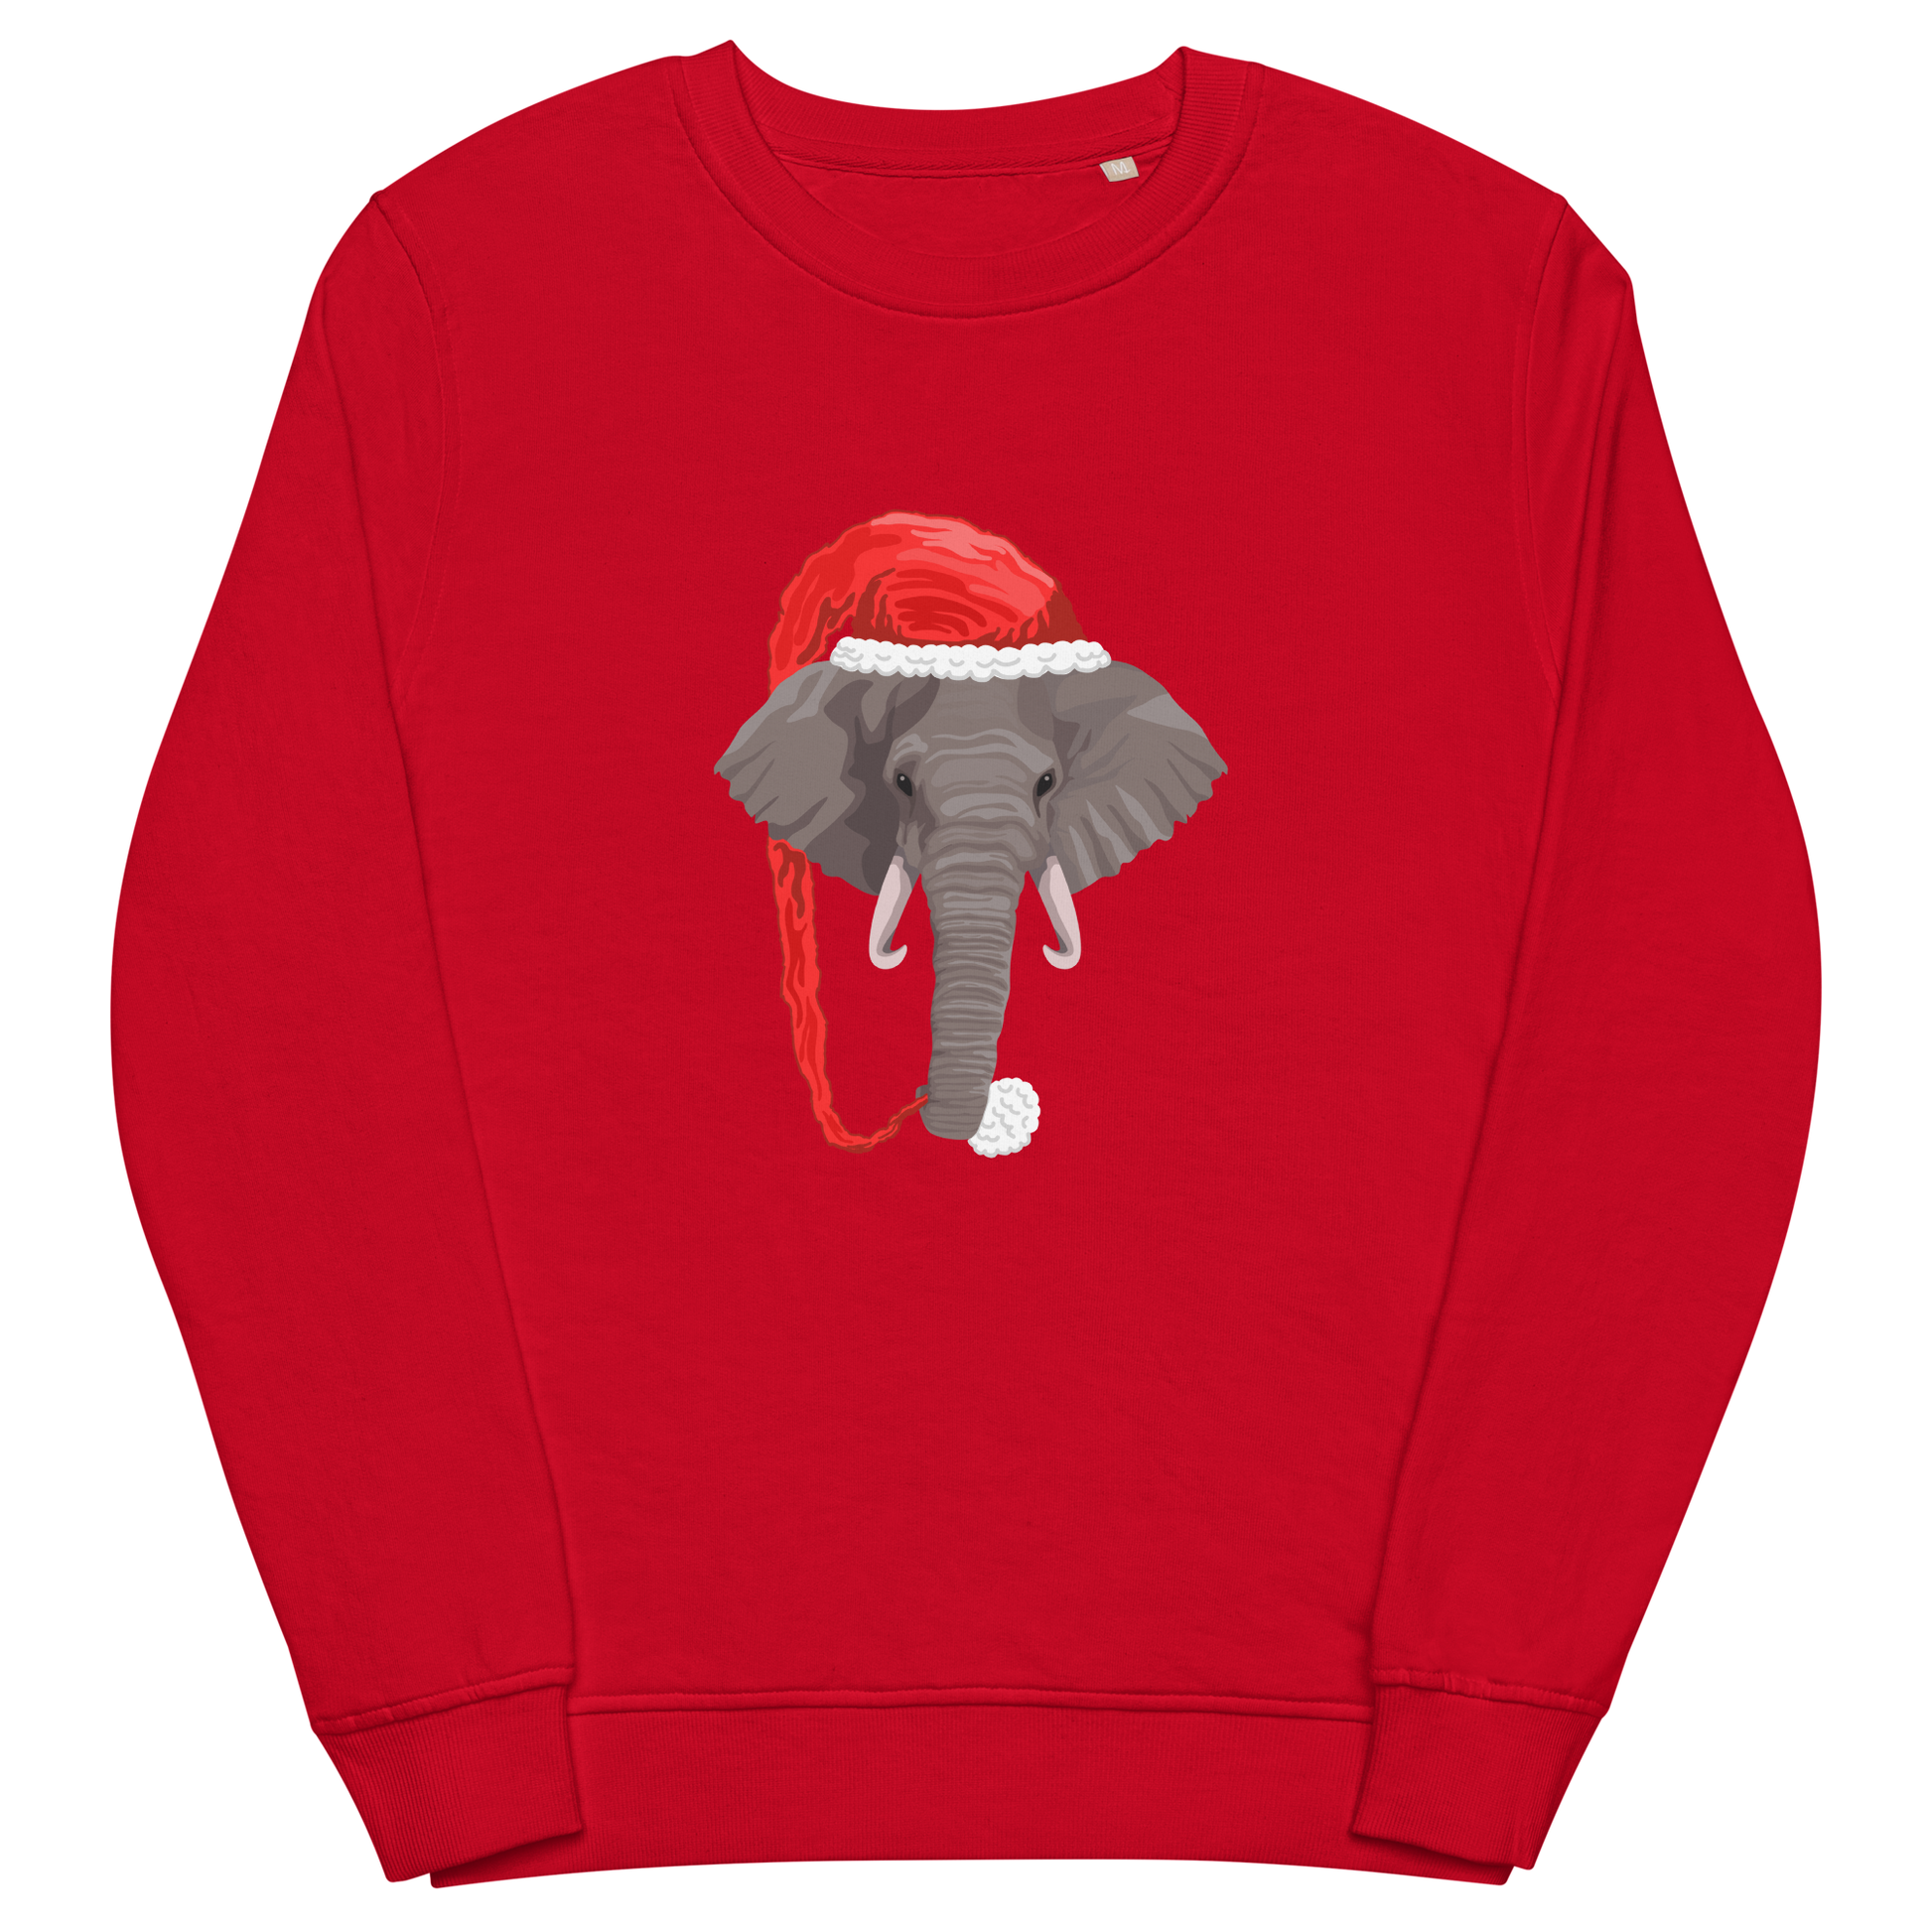 Red Organic Christmas Elephant Sweatshirt featuring a delight Elephant Wearing an Elf Hat graphic on the chest - Funny Christmas Graphic Elephant Sweatshirts - Boozy Fox